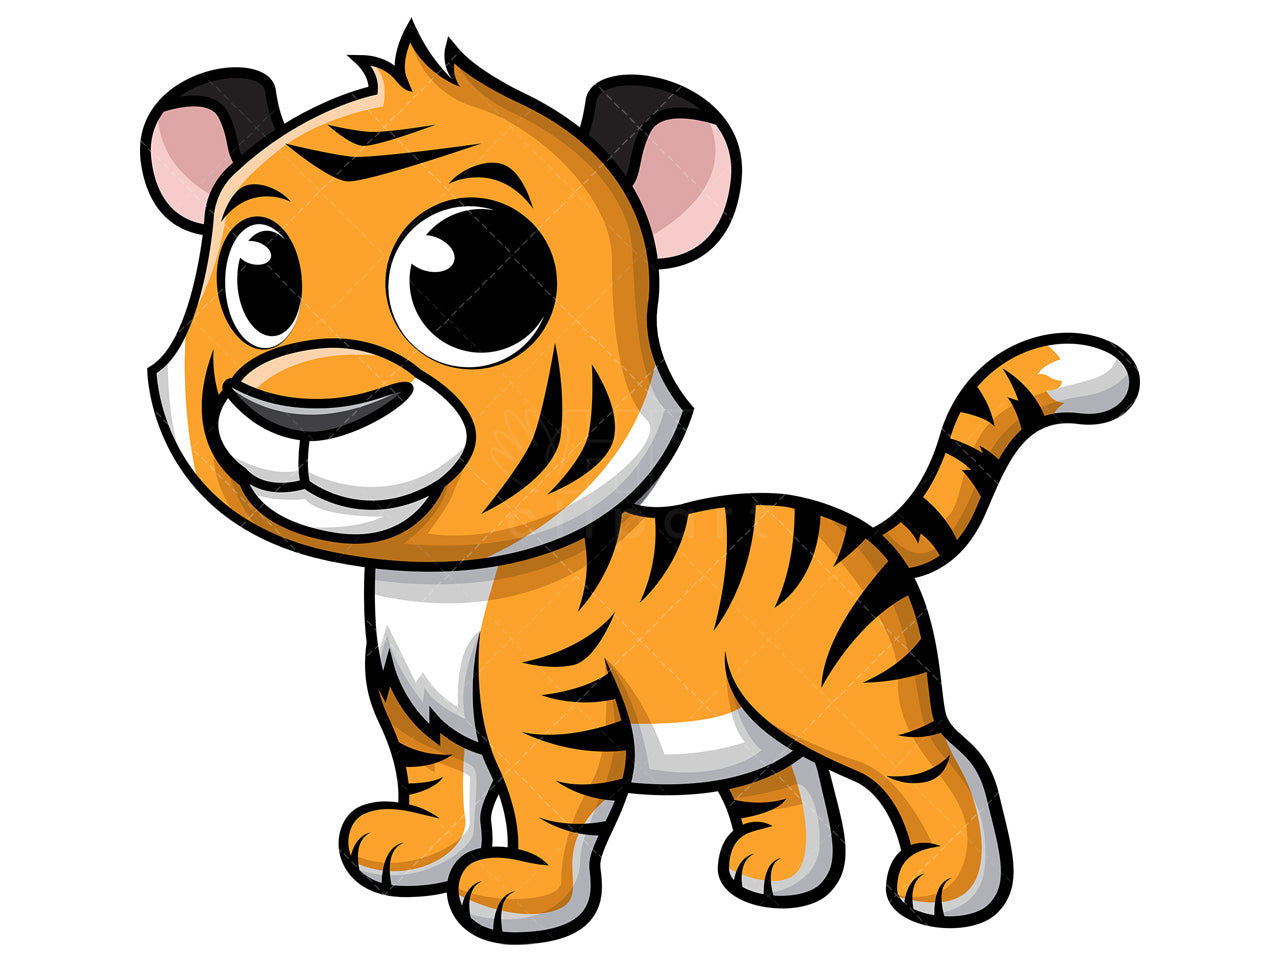 Royalty-free stock vector illustration of  a cute baby tiger.